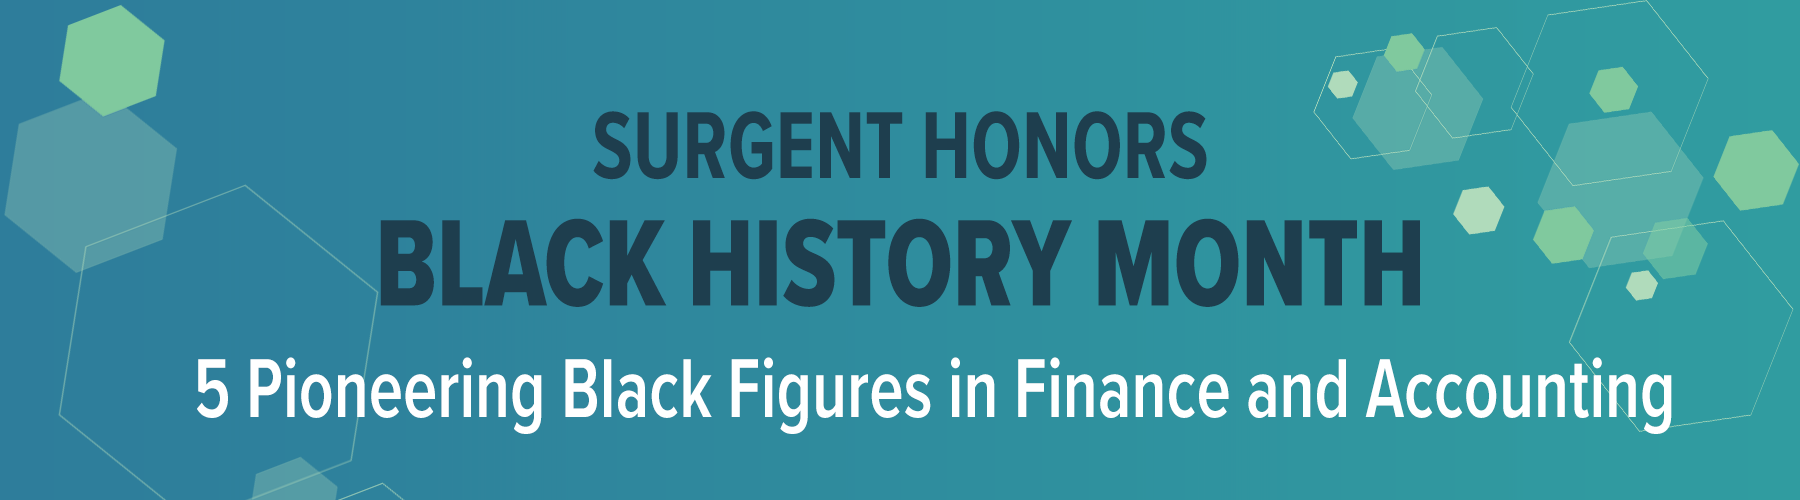 5 Pioneering Black Figures in the Finance and Accounting Industries  